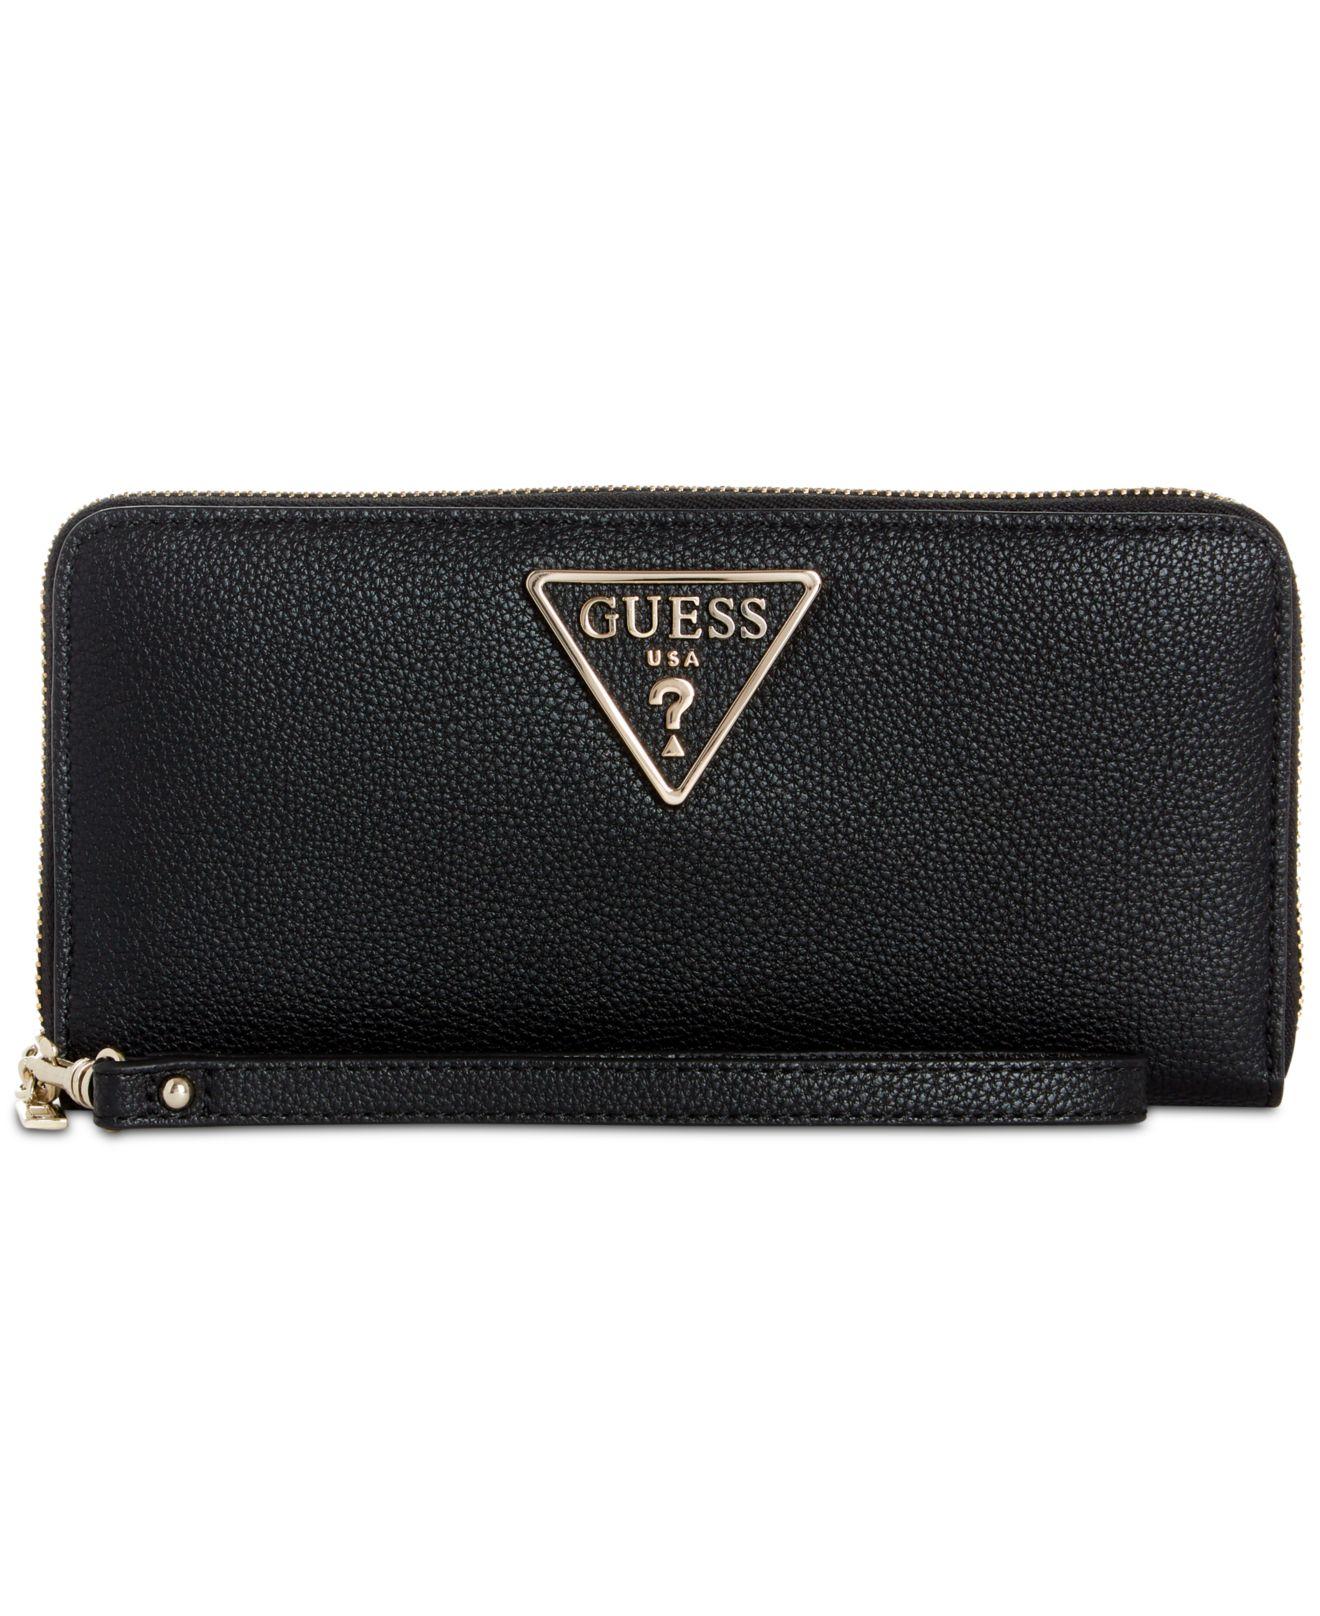 Guess G Legend Boxed Zip-around Wallet in Black - Lyst